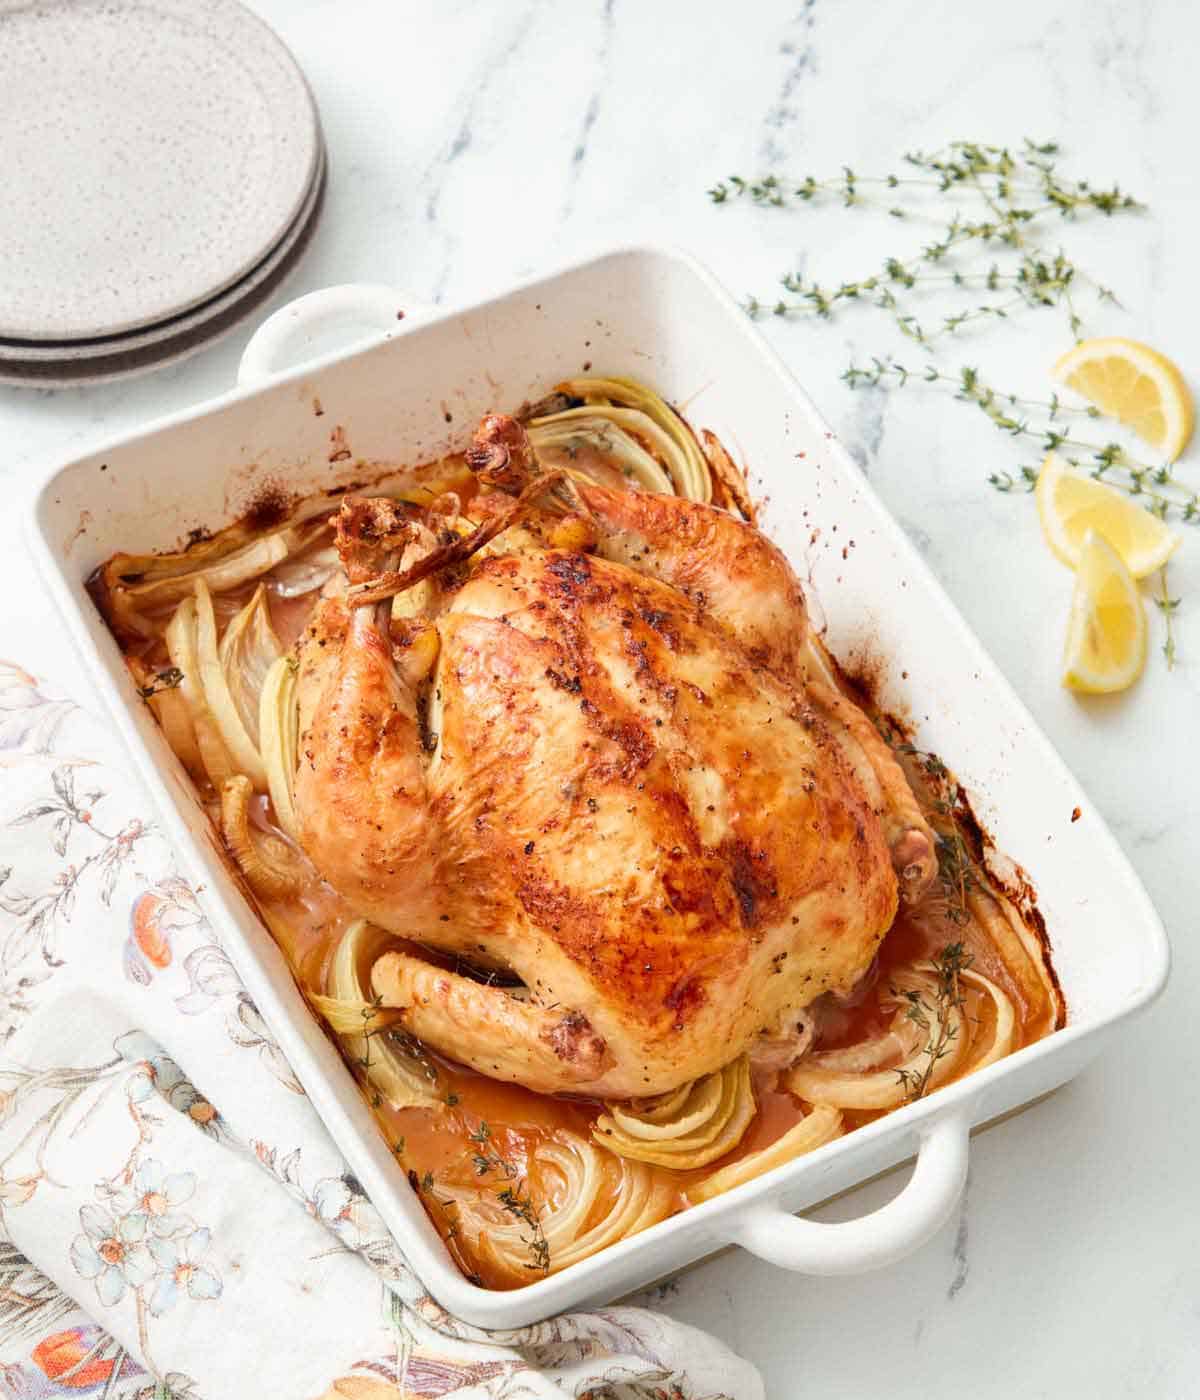 A baking dish with onions and thyme underneath a whole roasted chicken. More thyme and lemons scattered on the side.